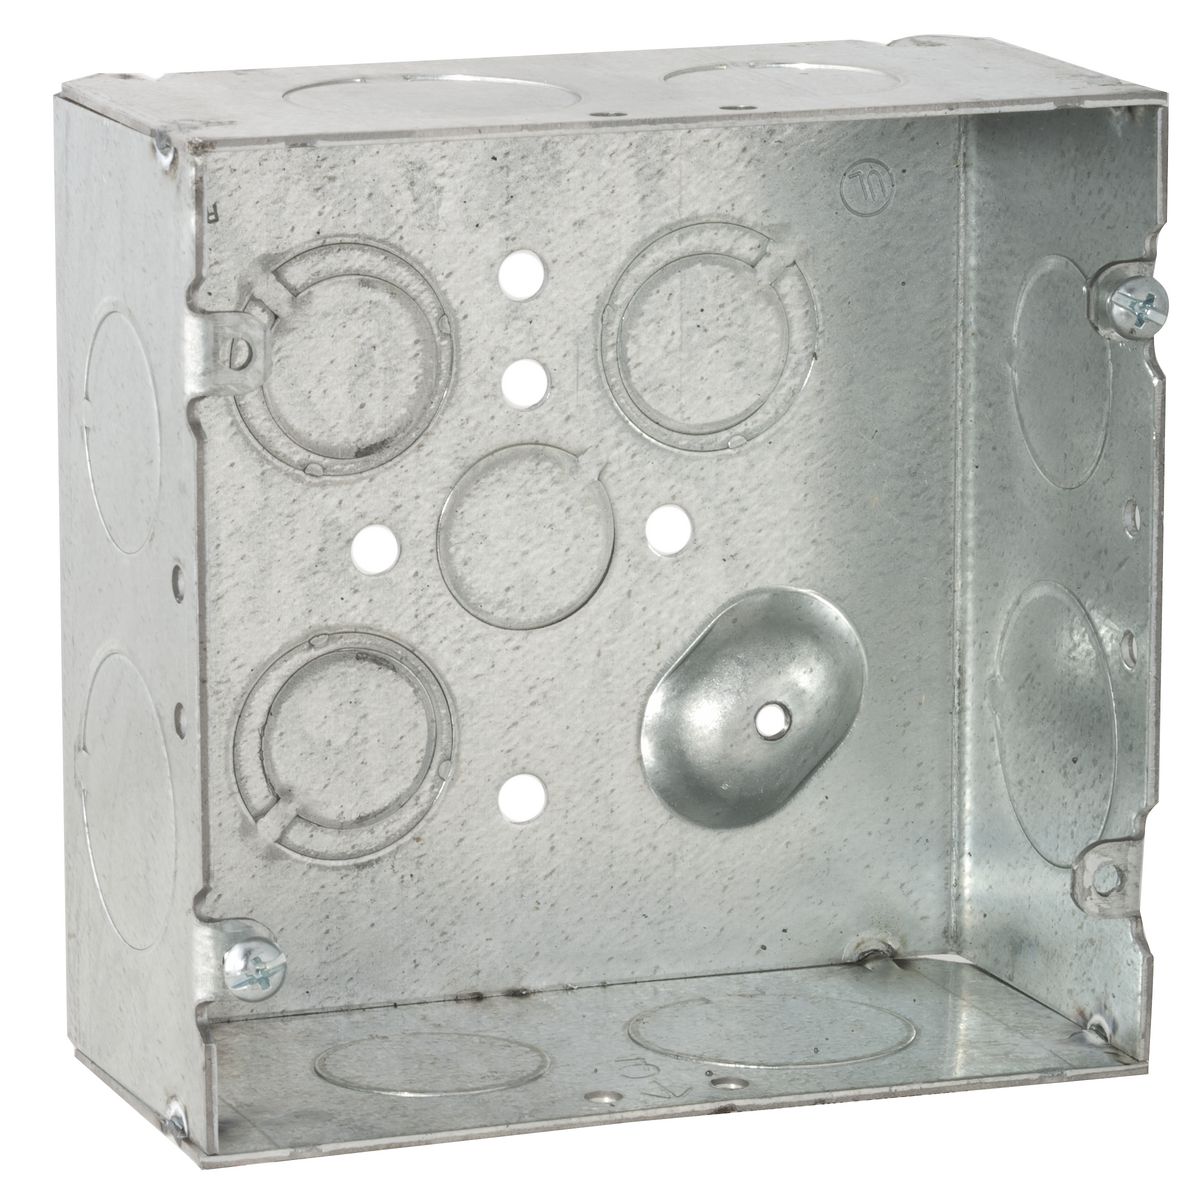 RACO 265 4-11/16" SQUARE BOX, 2-1/8" DEEP, 3/4" & 1" SIDE KNOCKOUTS, WELDED